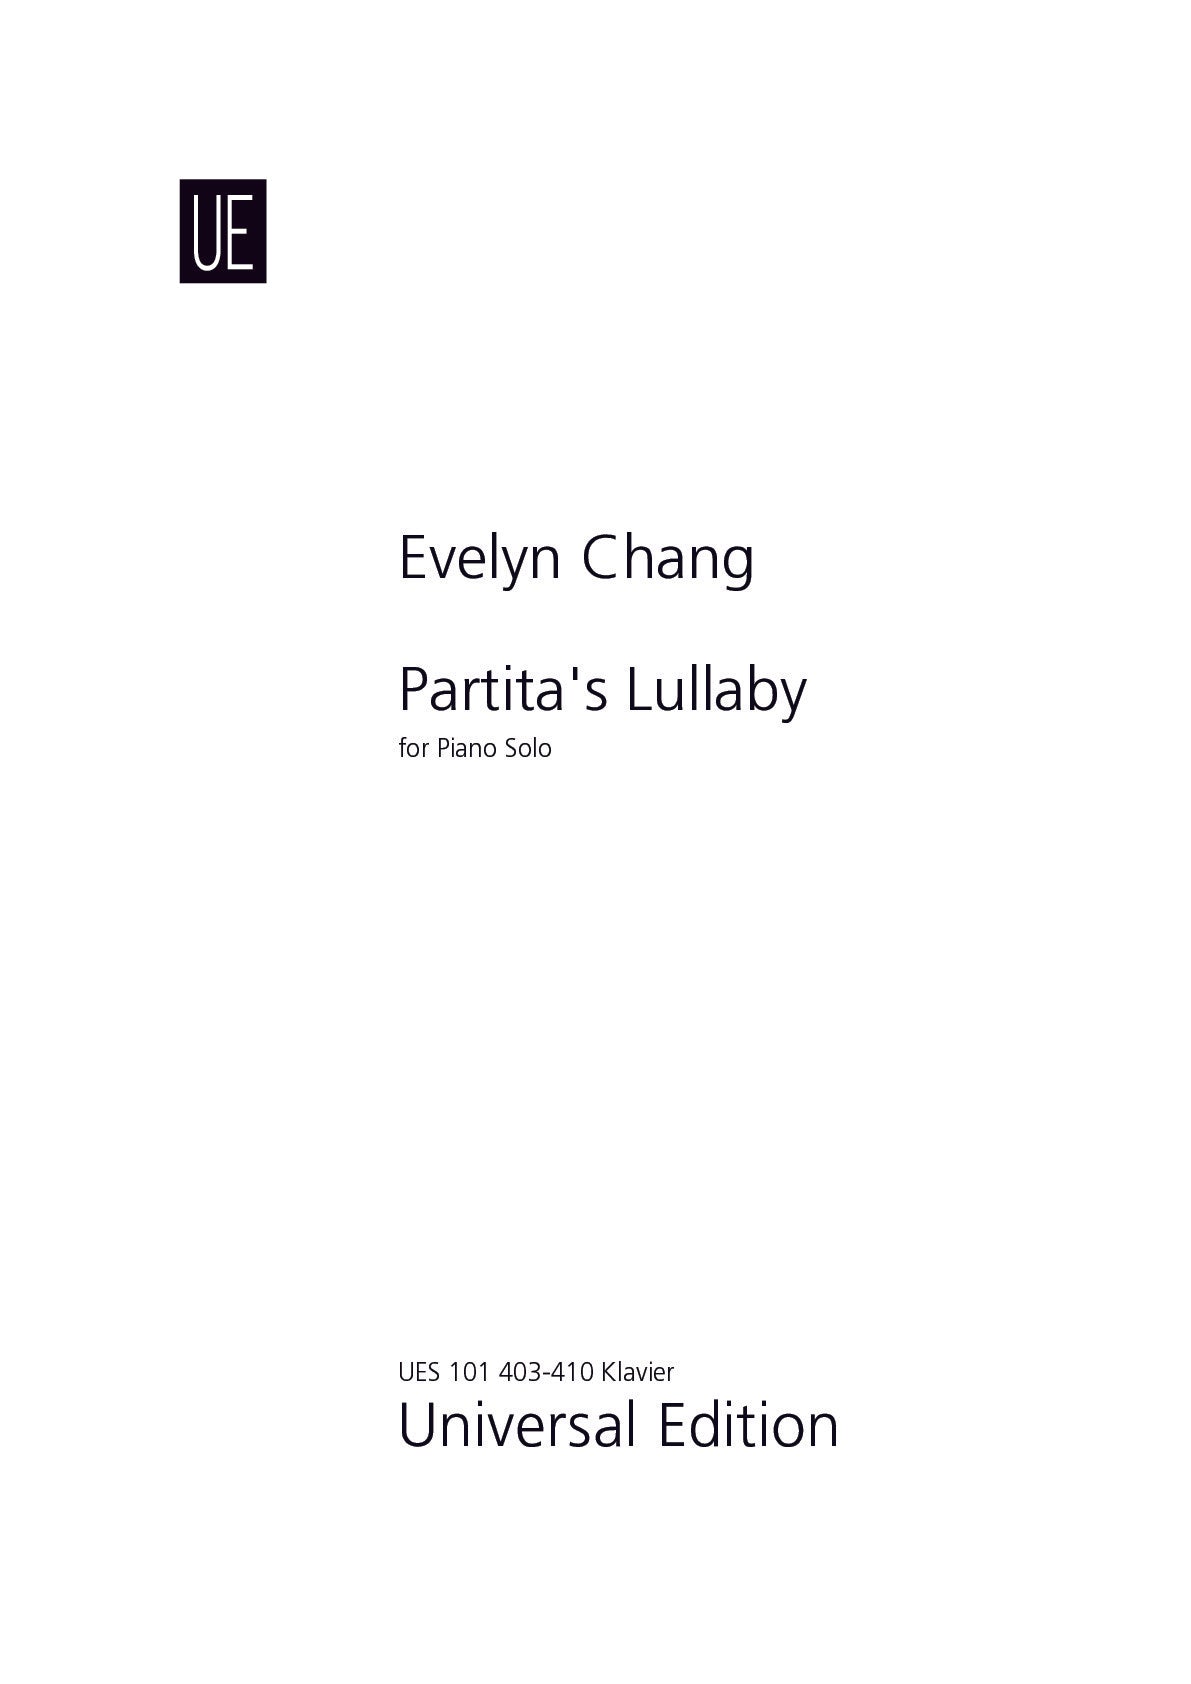 Chang Evelyn: Partita's Lullaby for Piano Solo